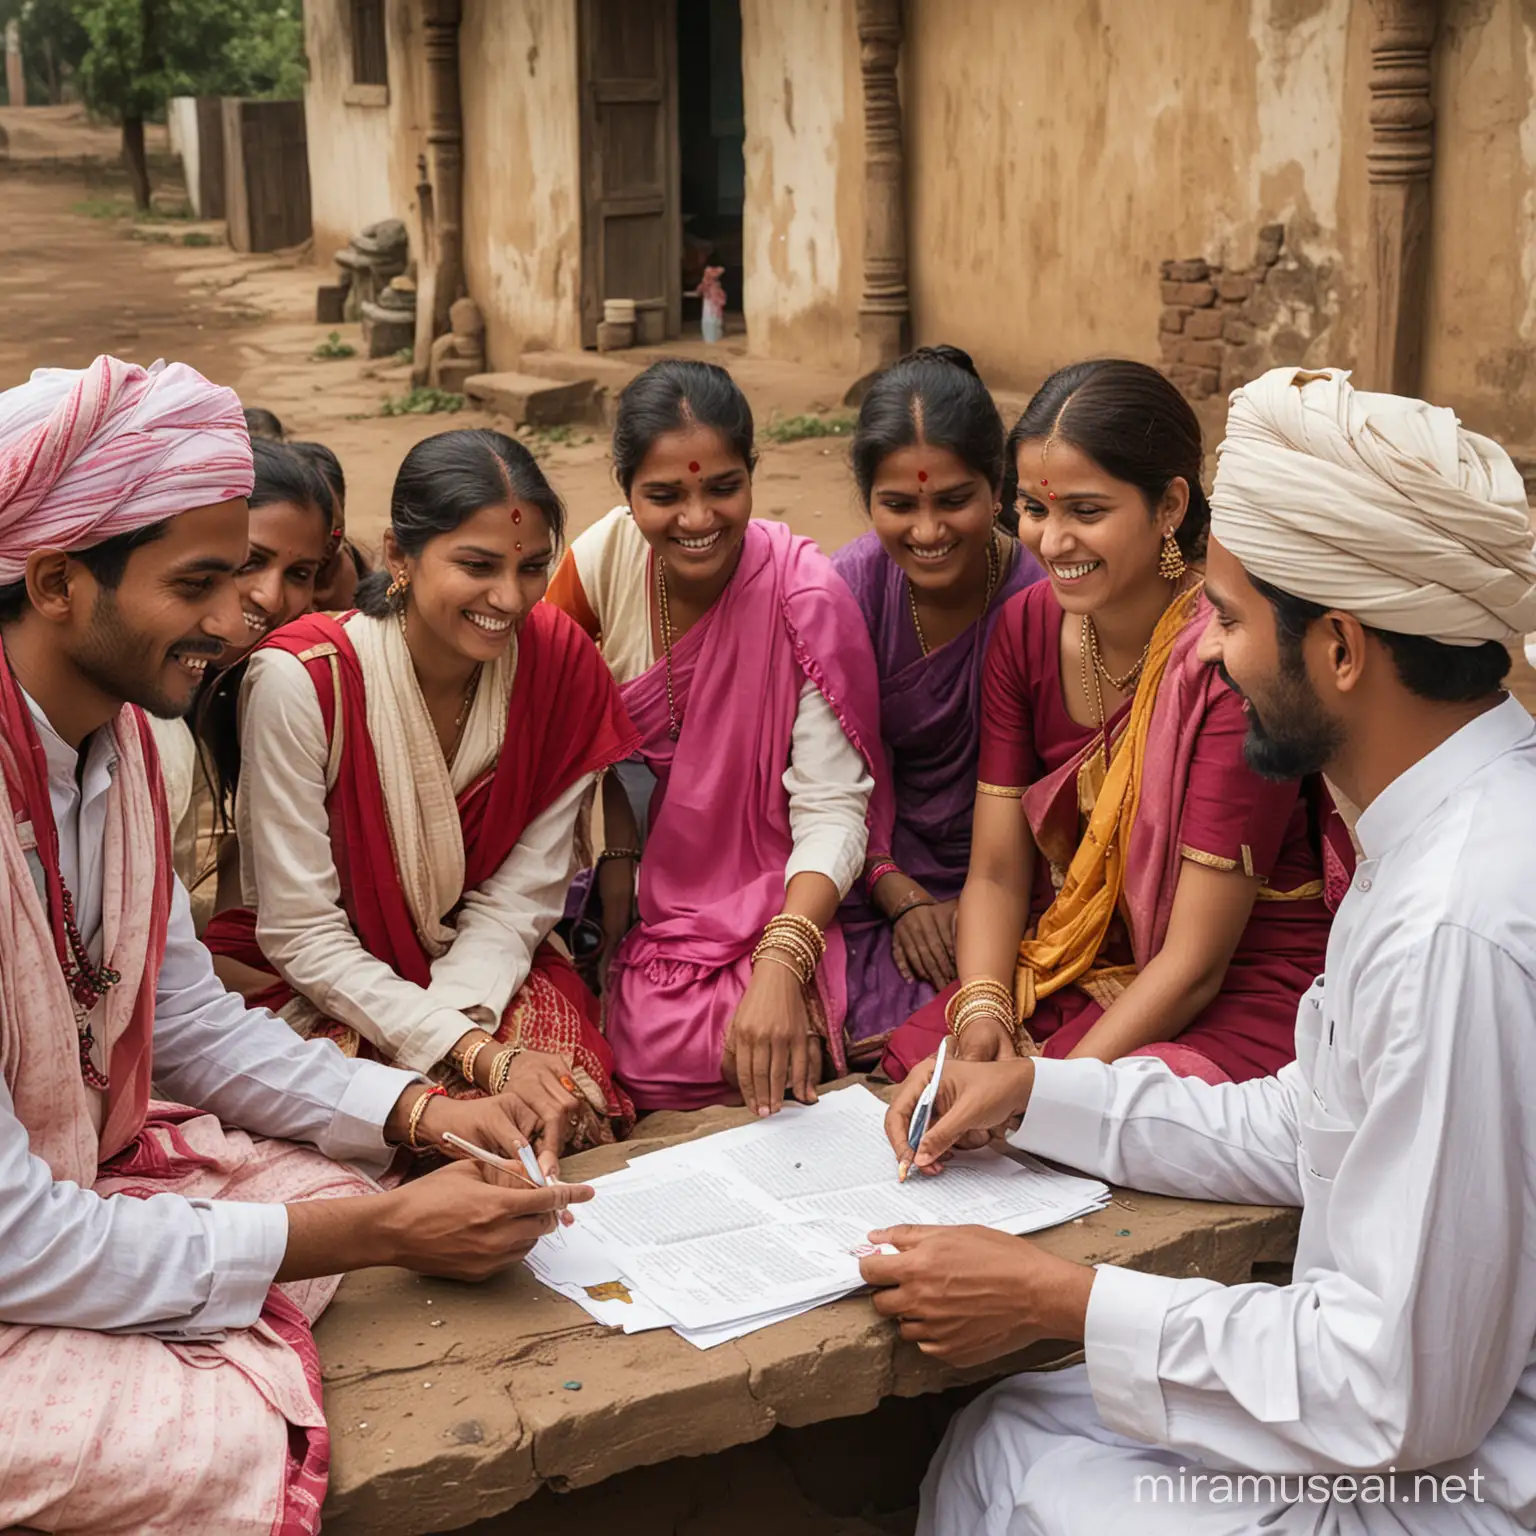 A group of people in India, dressed in traditional clothing, happily talk about their proposal for a healing system. A person writes a note with one hand on a piece of paper.